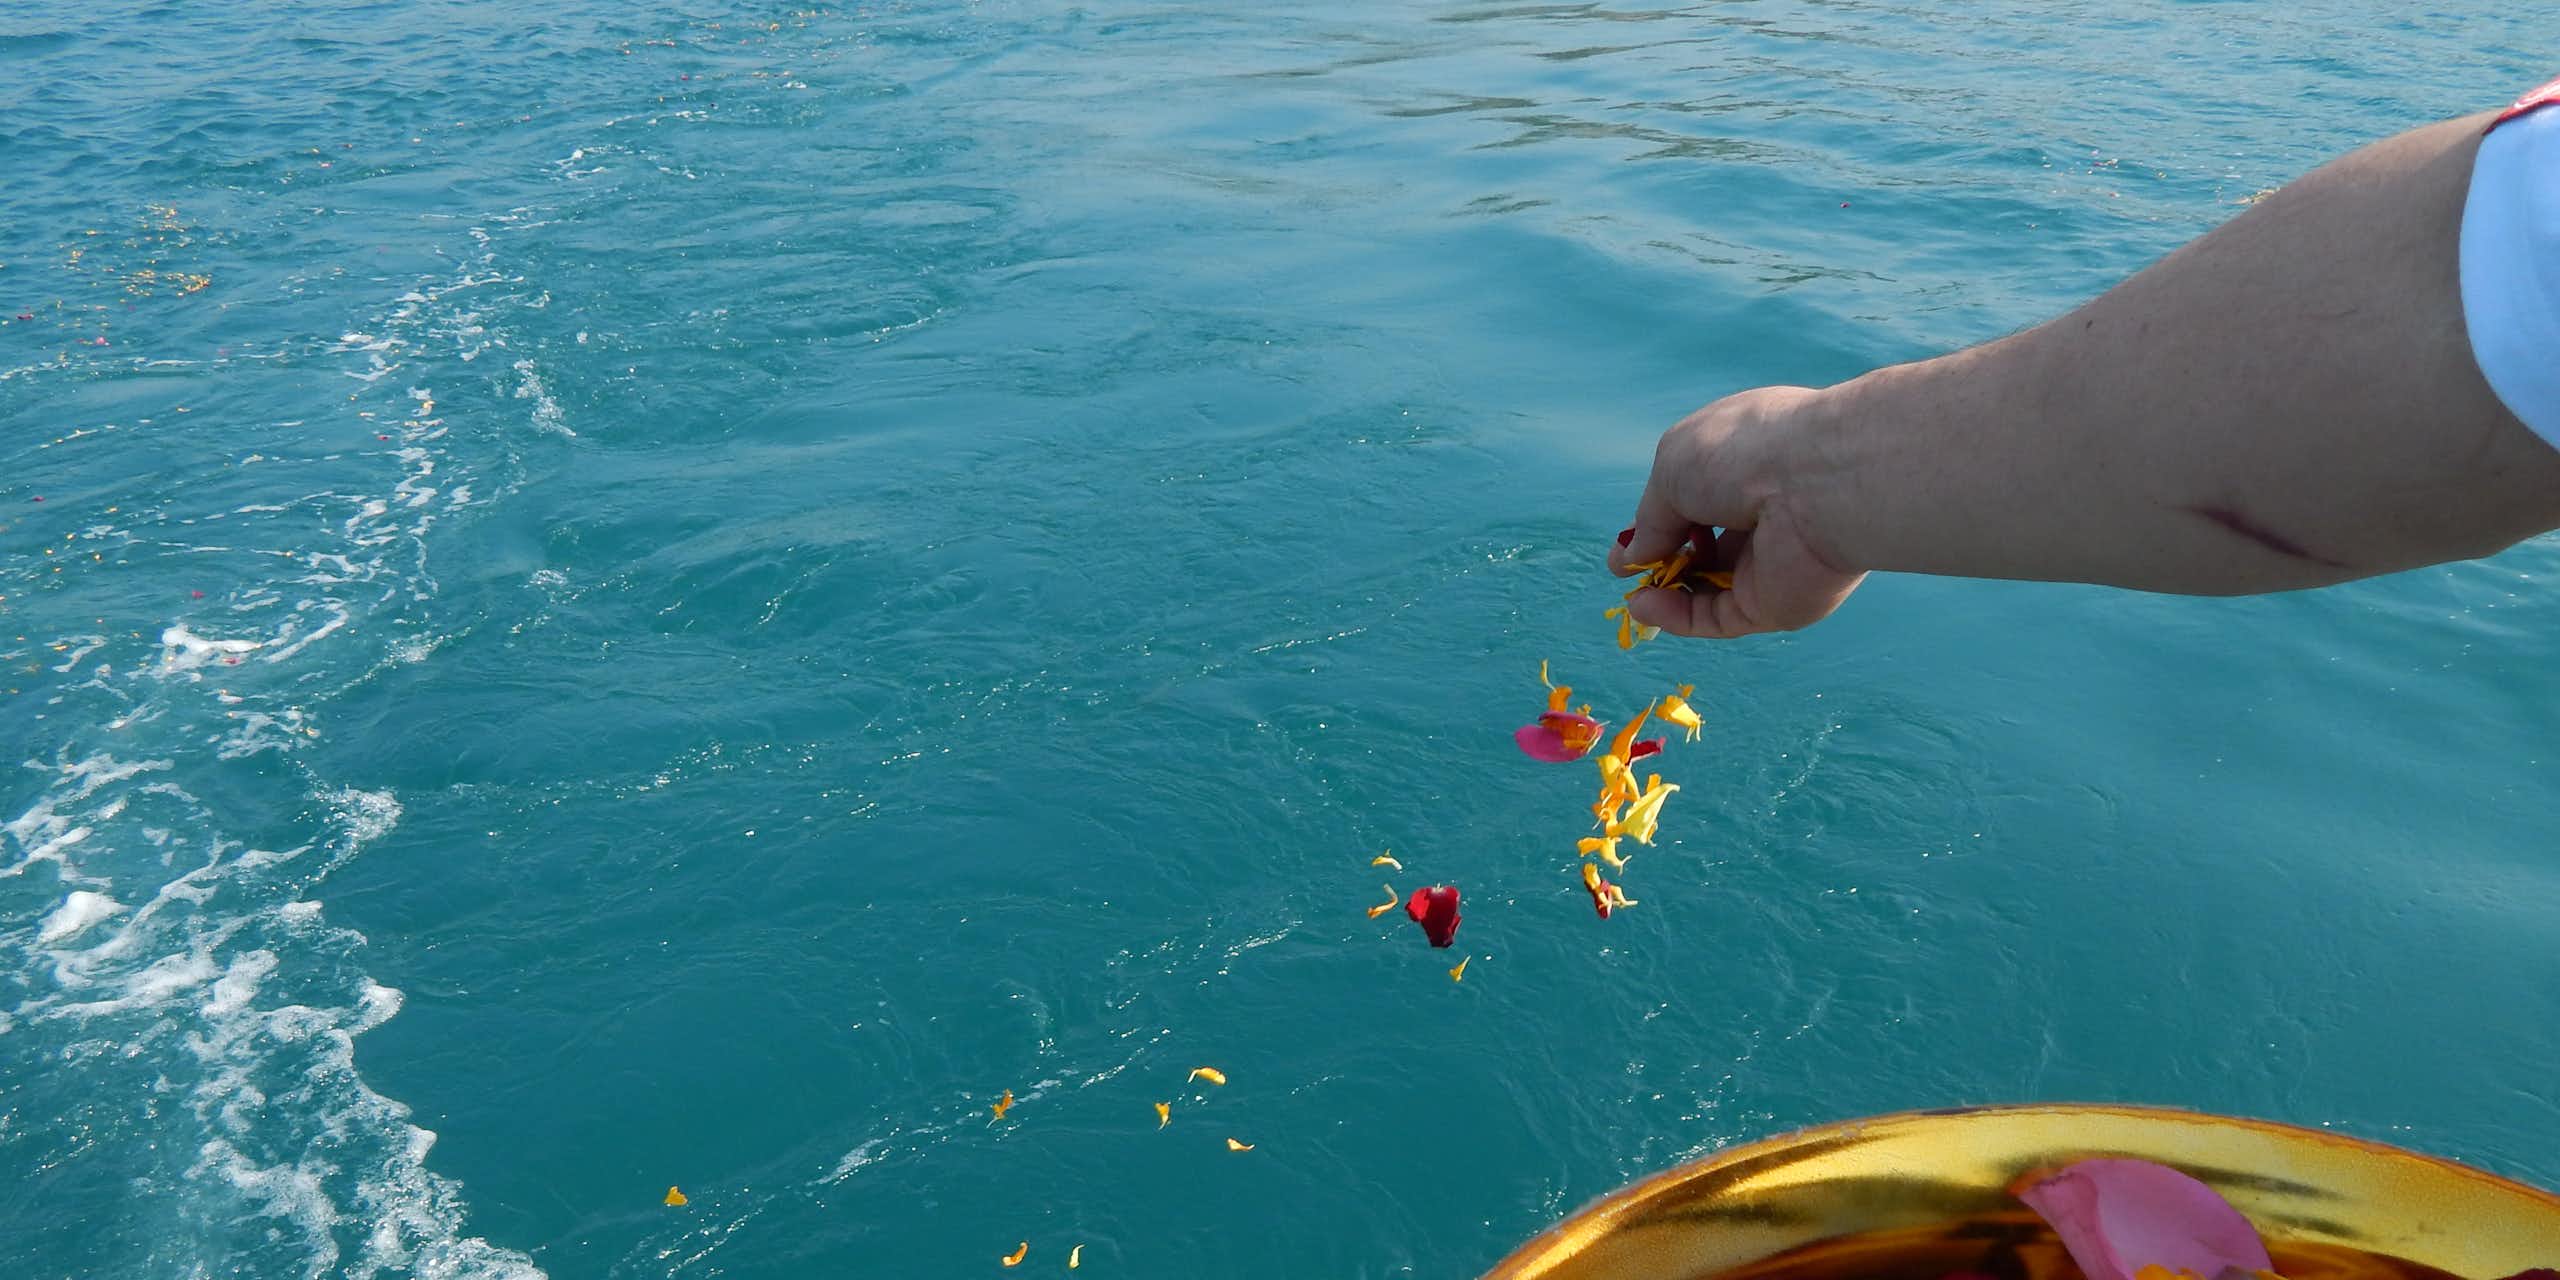 A person scatters flowers over the ocean.